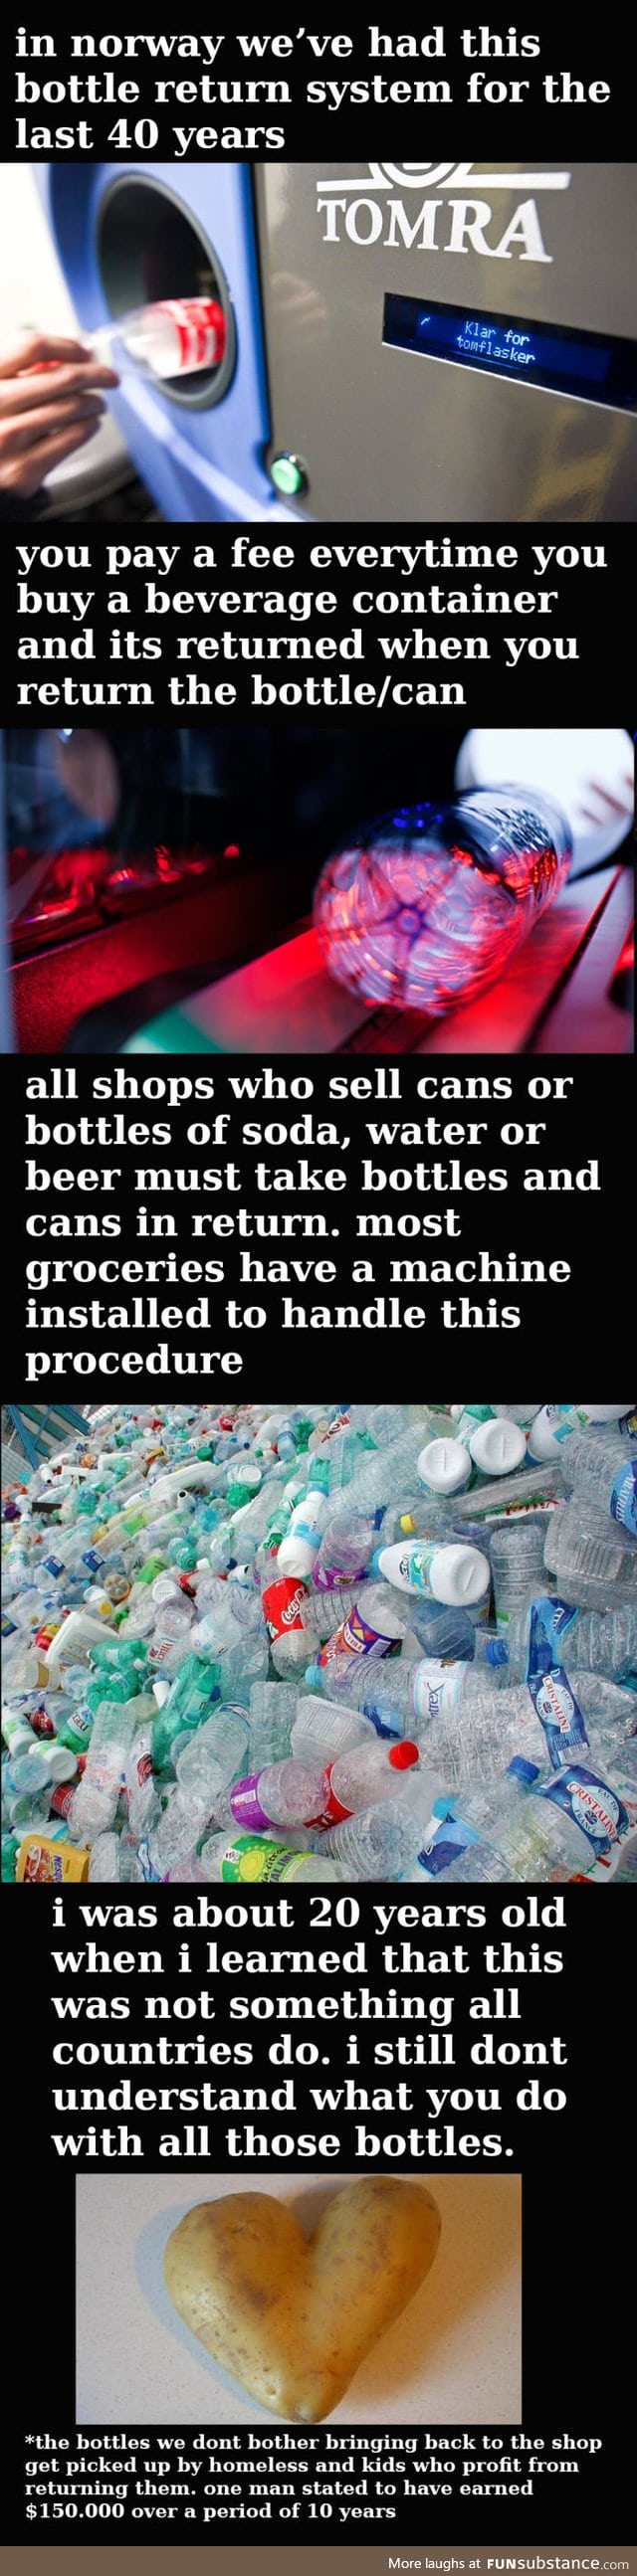 Saving the world with bottles